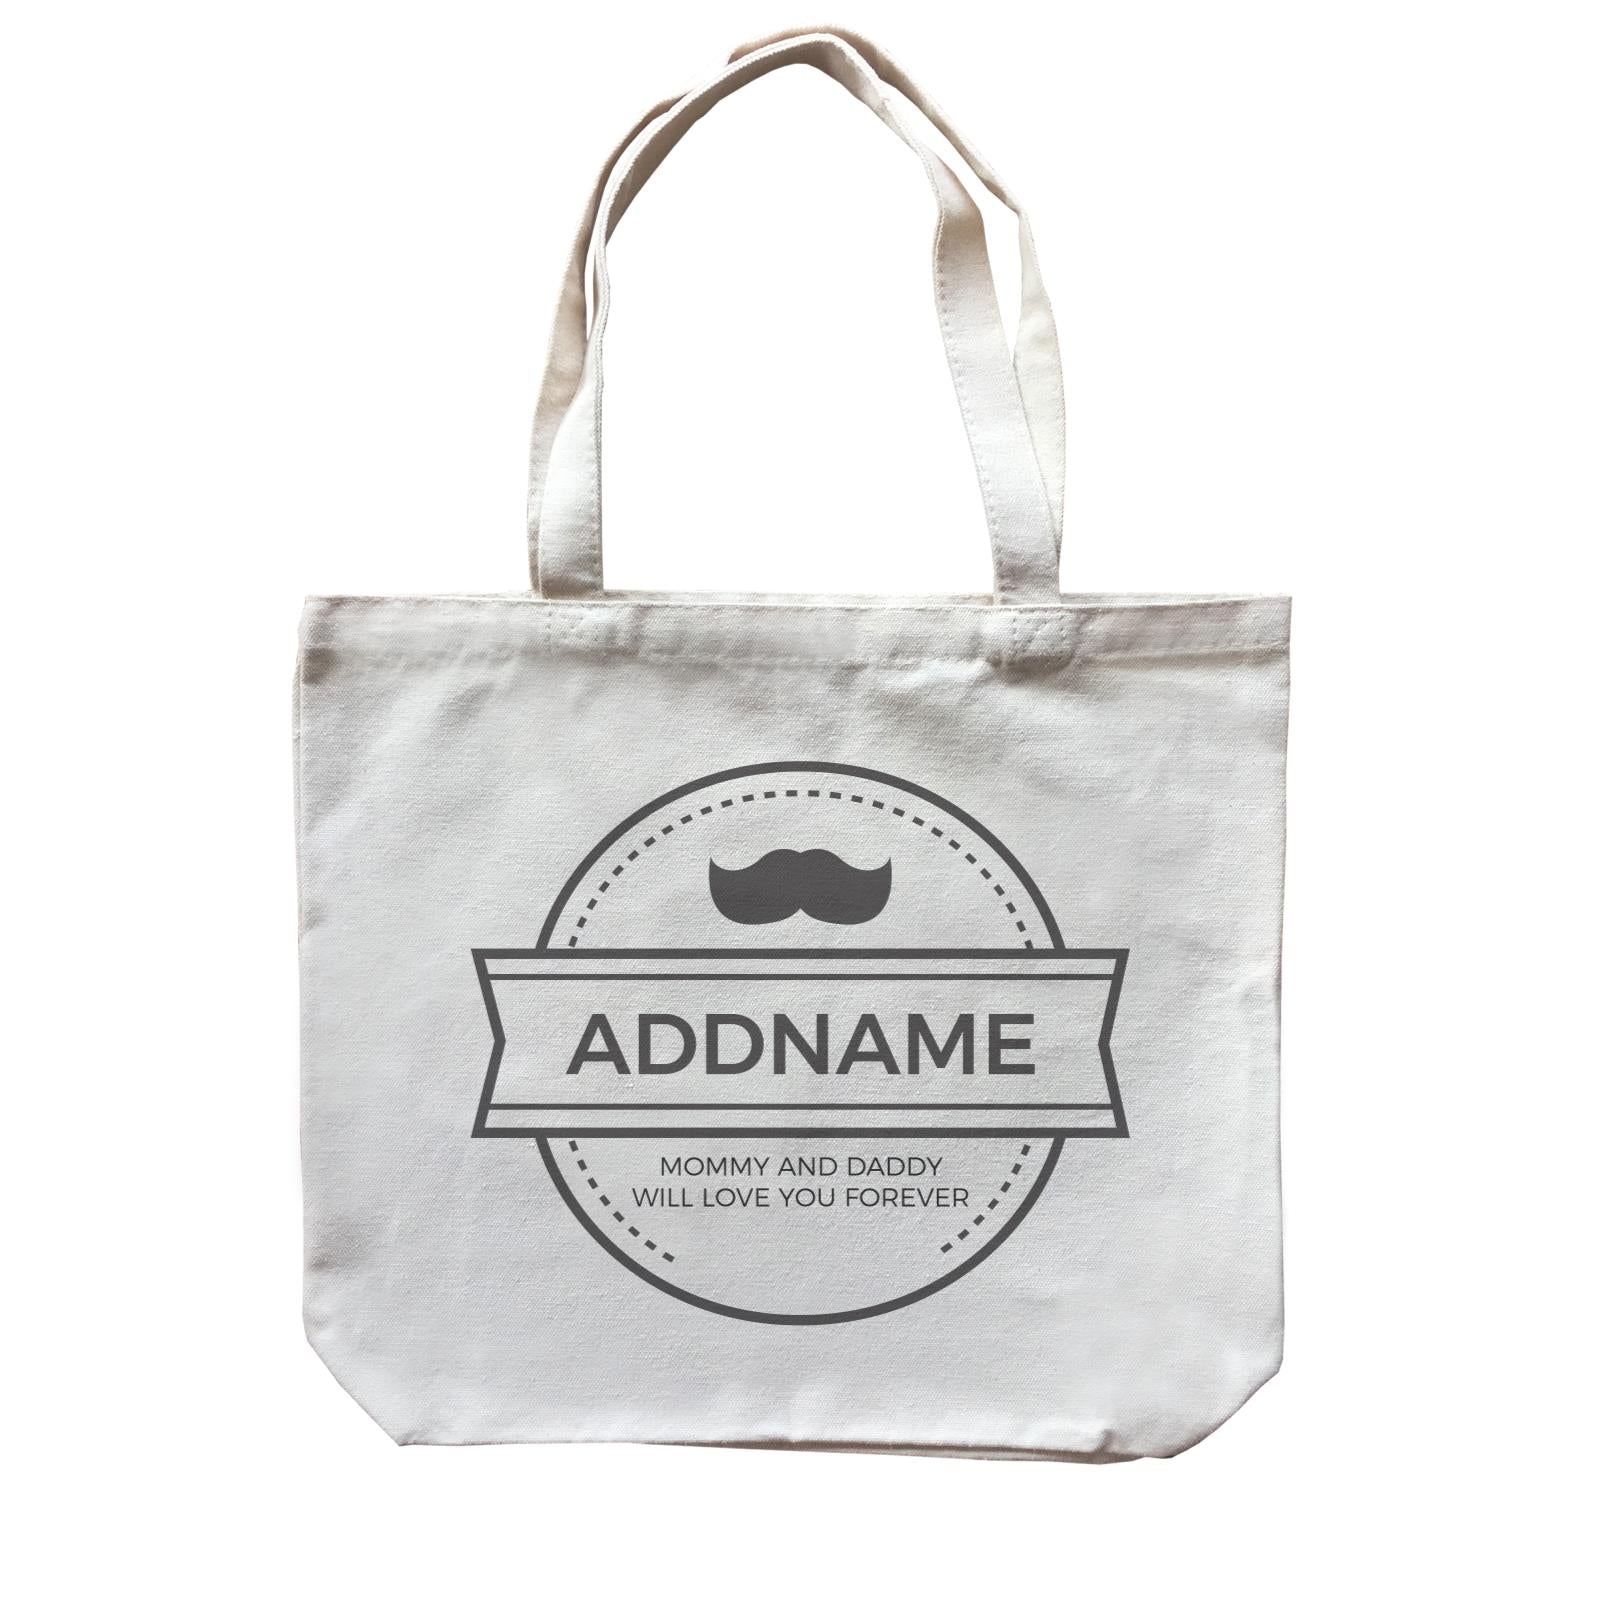 Moustache Emblem Personalizable with Name and Text Canvas Bag